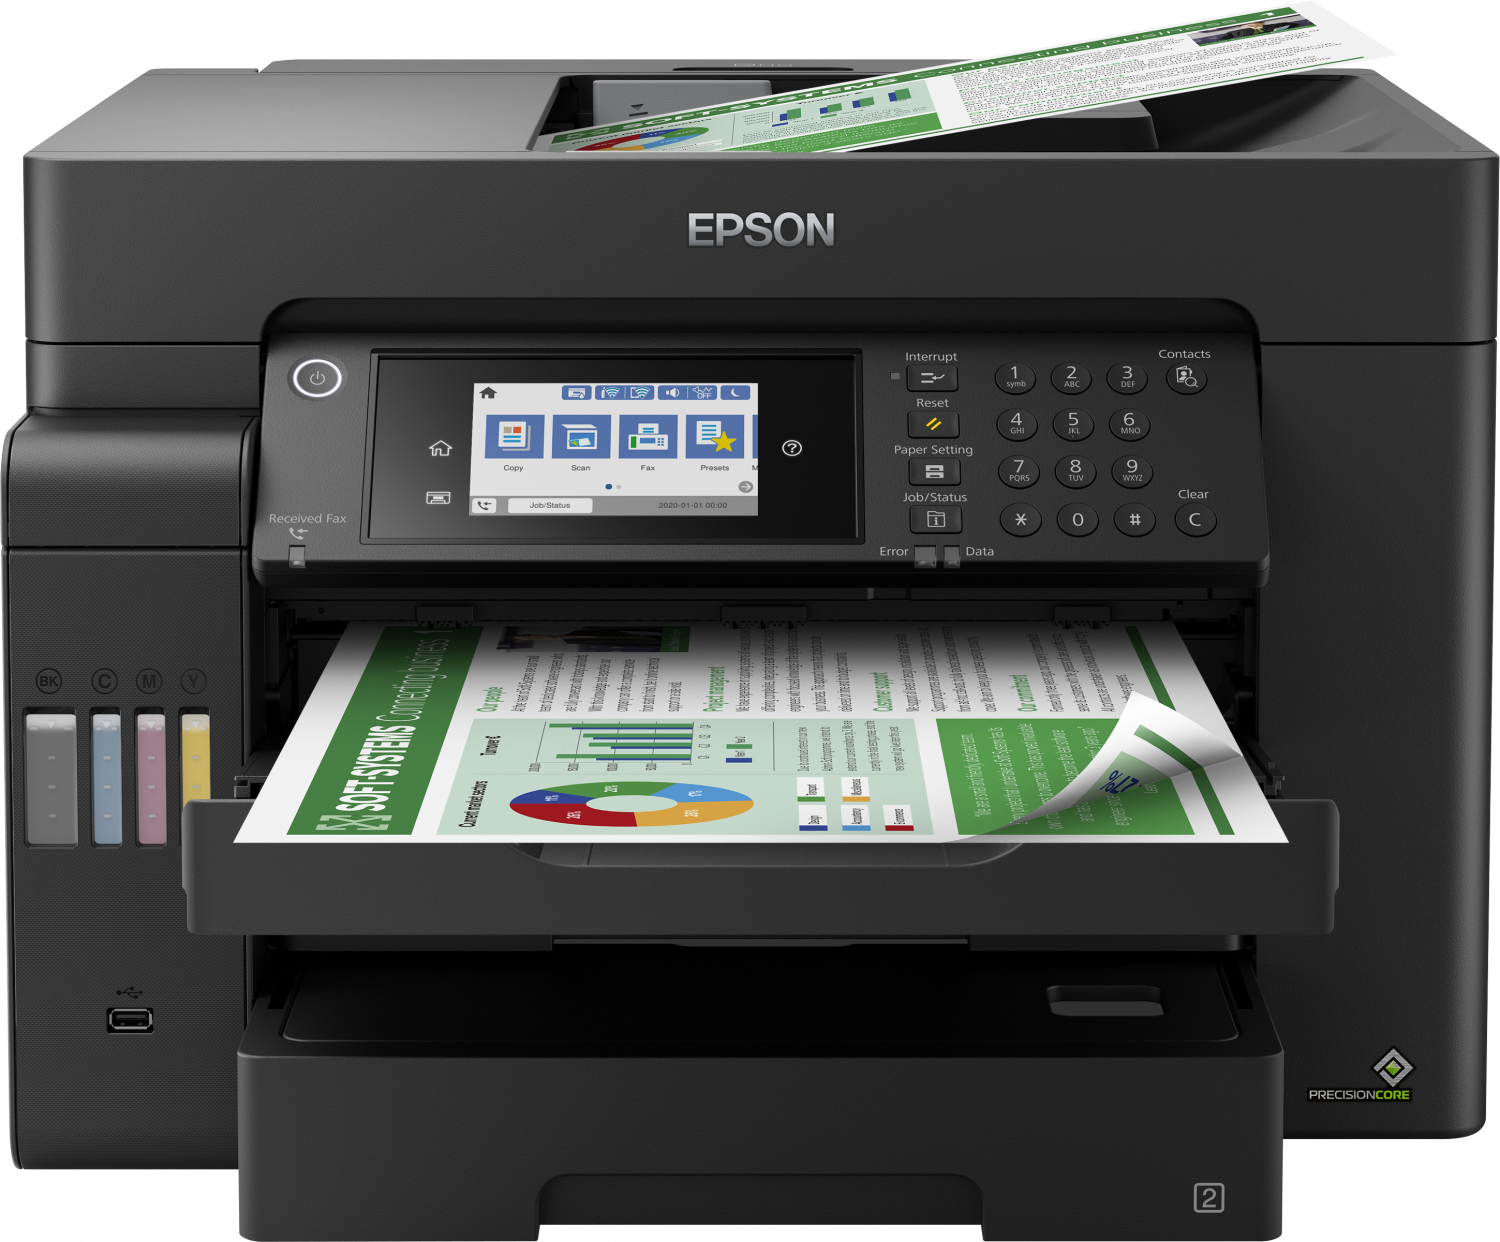 Step-by-step Driver Epson Printer ET-16600 Installation in Ubuntu 22.04 - Featured